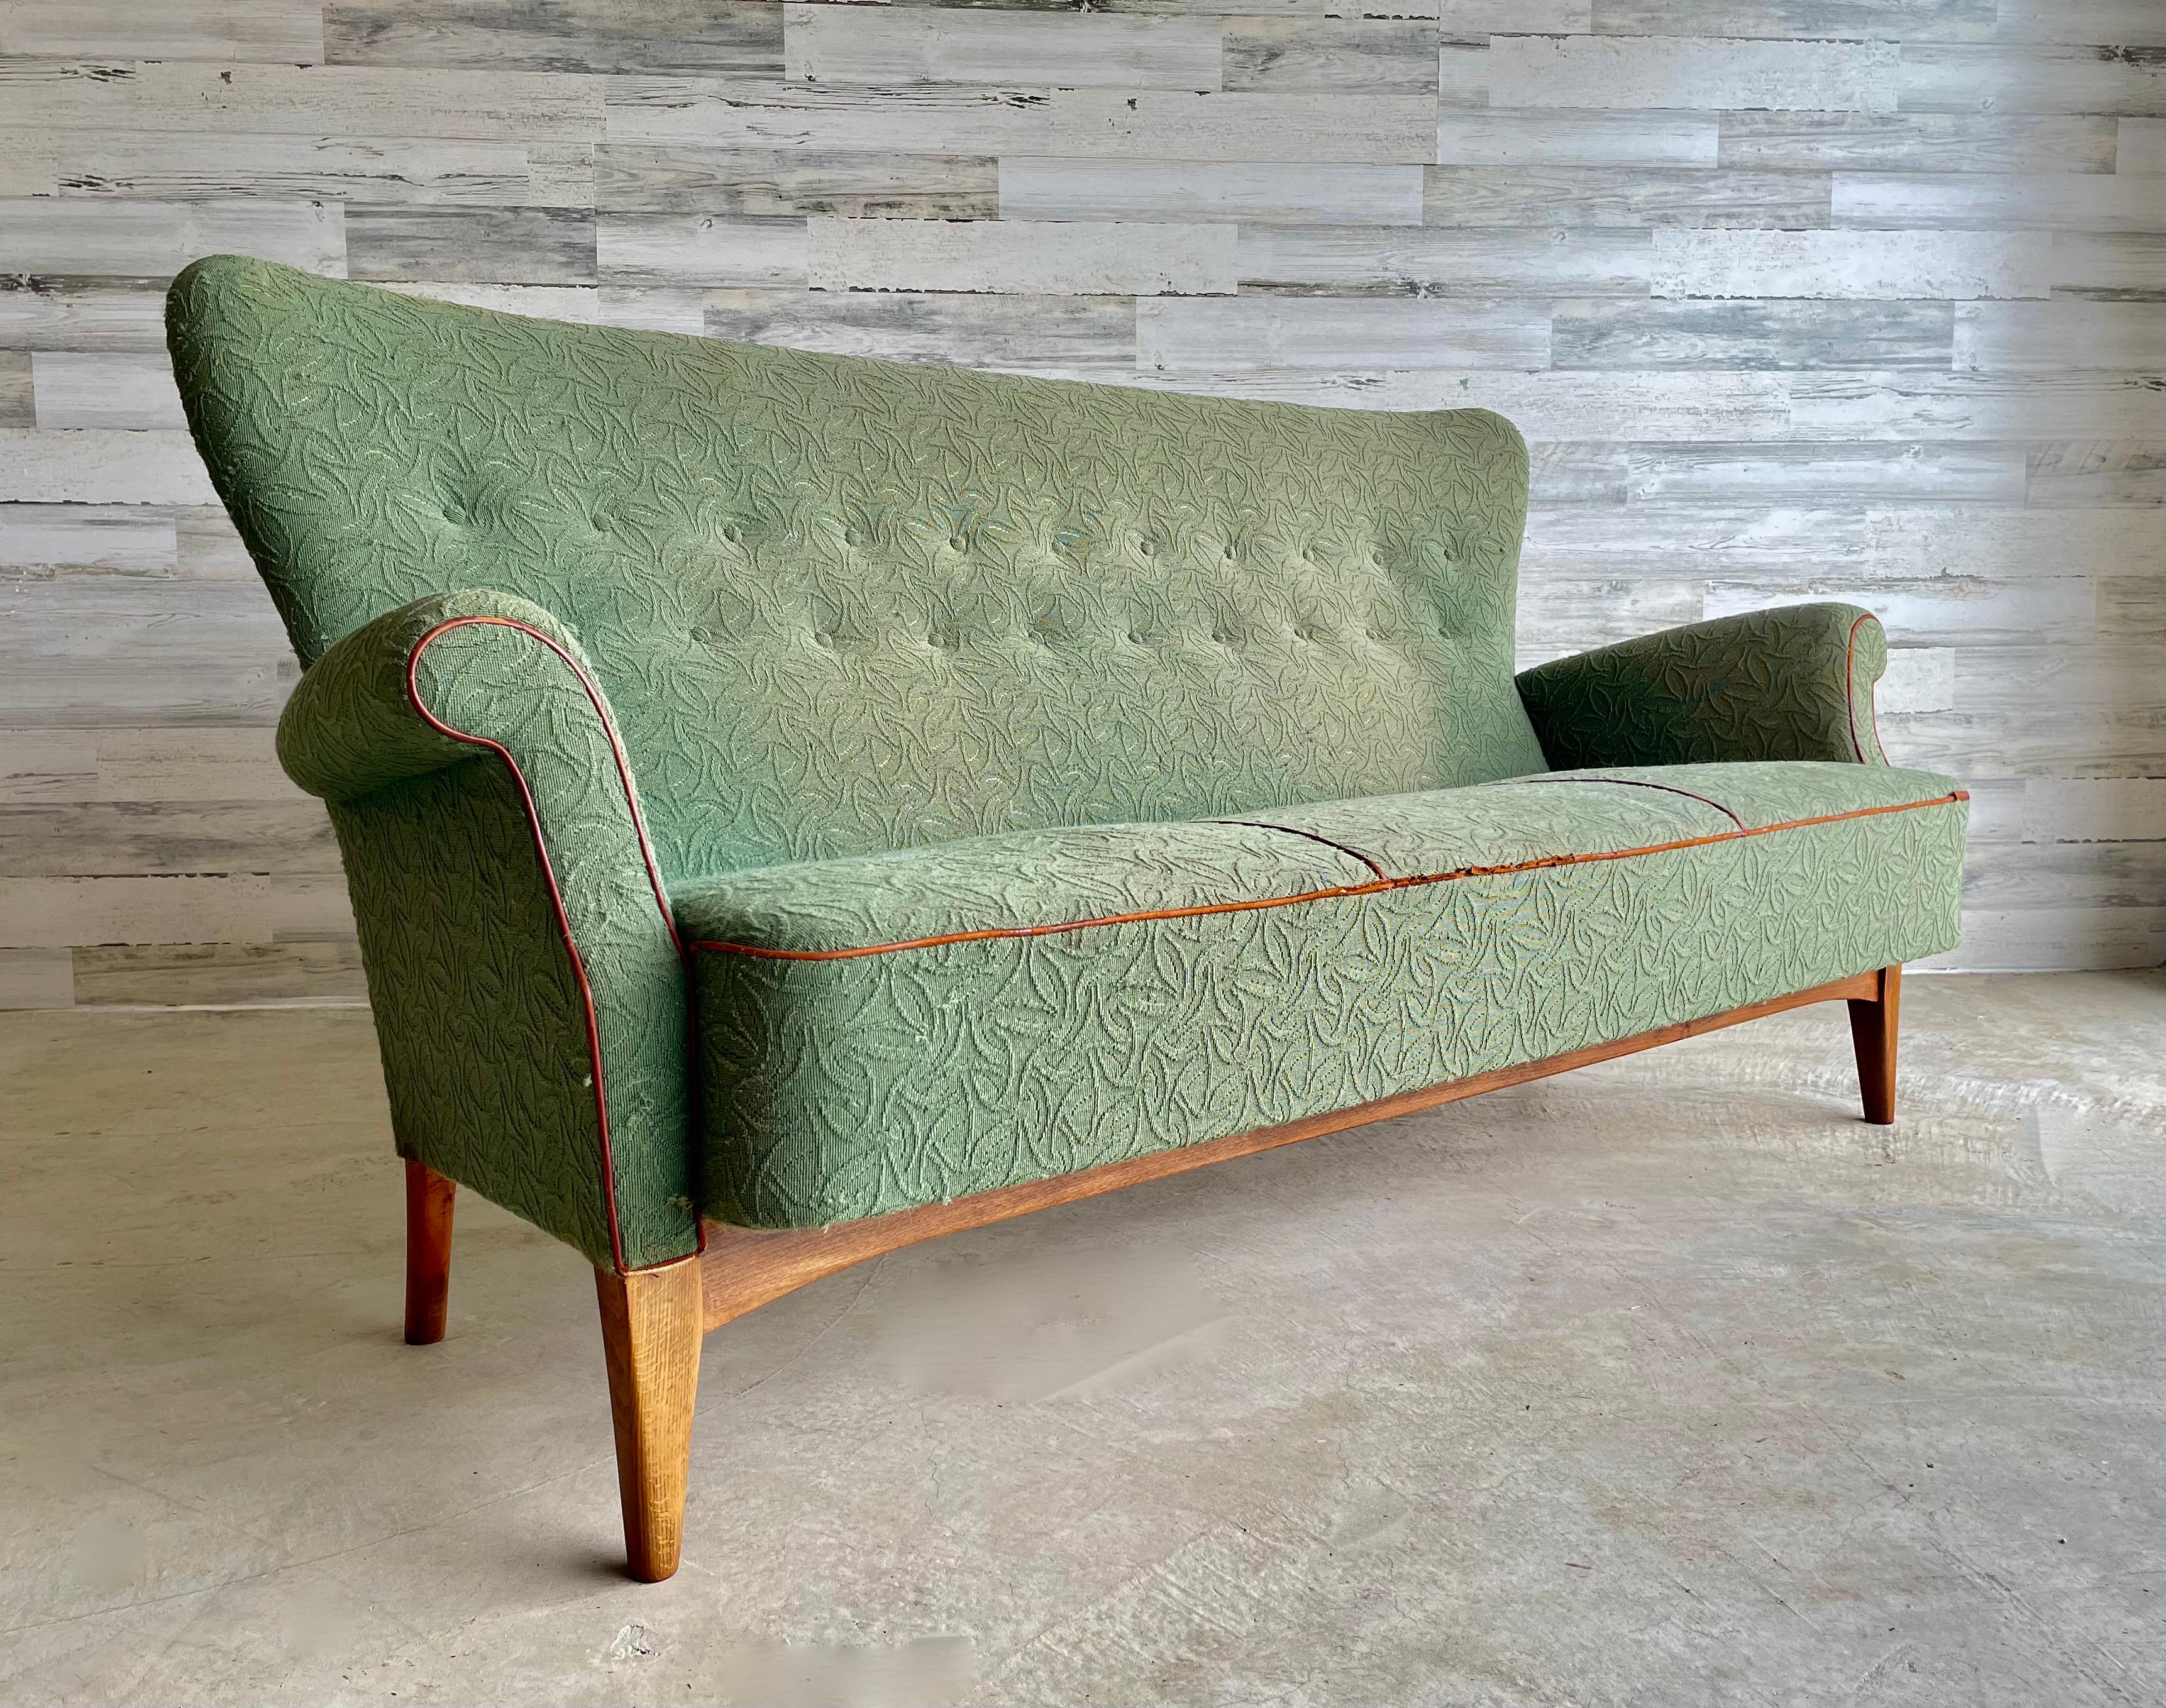 Fritz Hansen Model 8112 Wingback sofa. In original condition with the original stamp on the bottom. This sofa is very rare and will look great recovered in new upholstery.